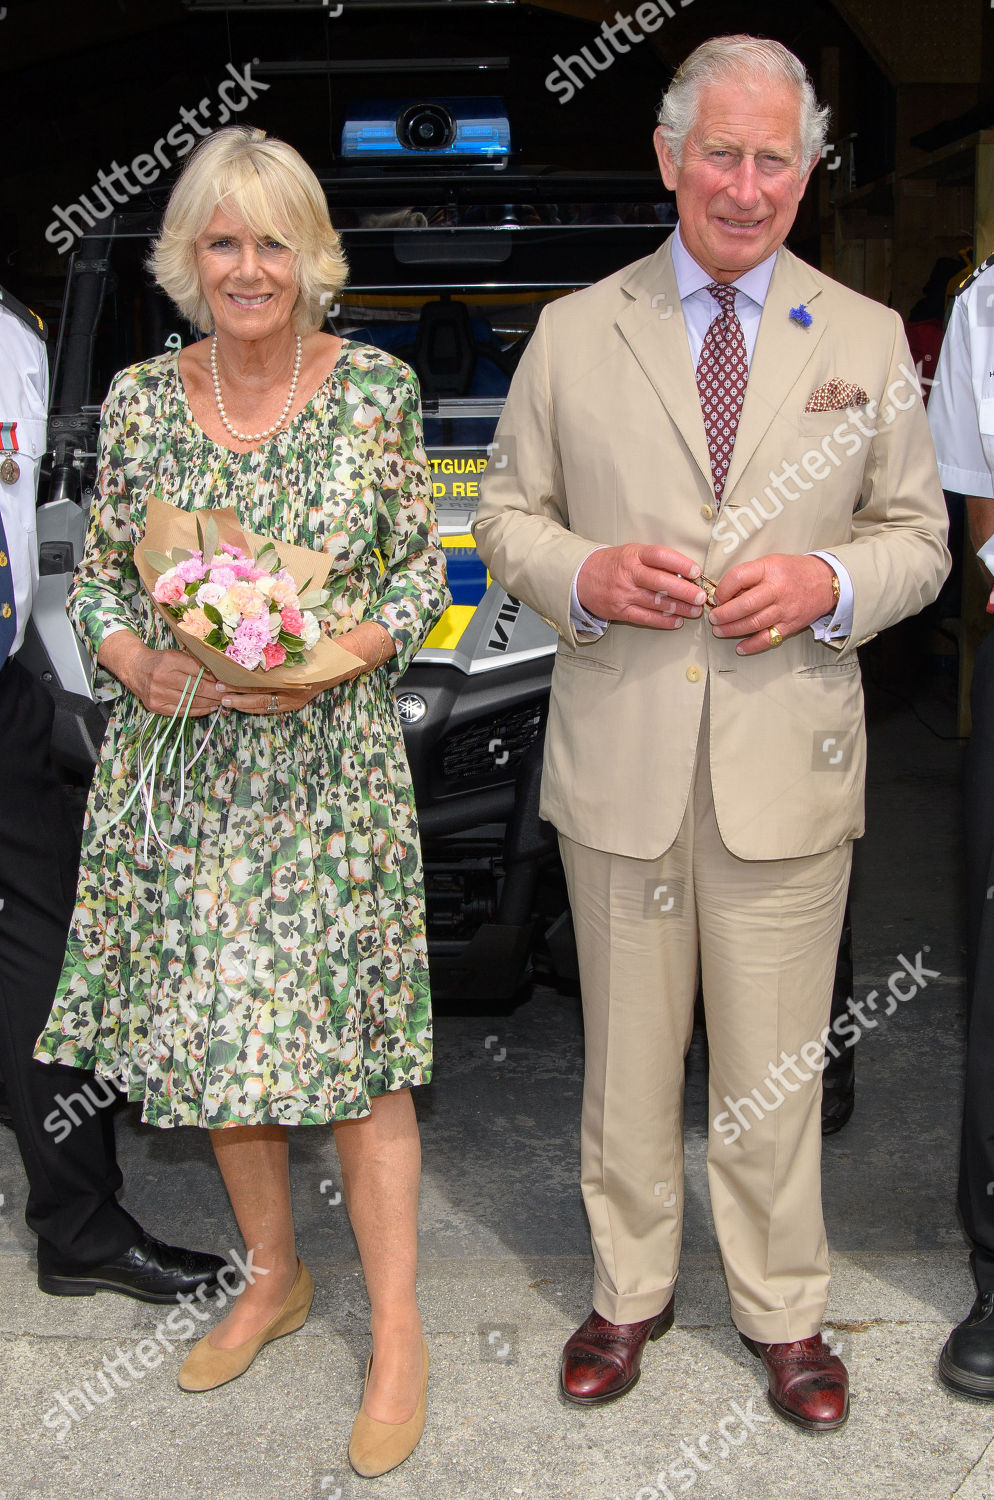 prince-charles-and-camilla-duchess-of-cornwall-visit-to-the-isles-of-scilly-cornwall-uk-shutterstock-editorial-9763363by.jpg